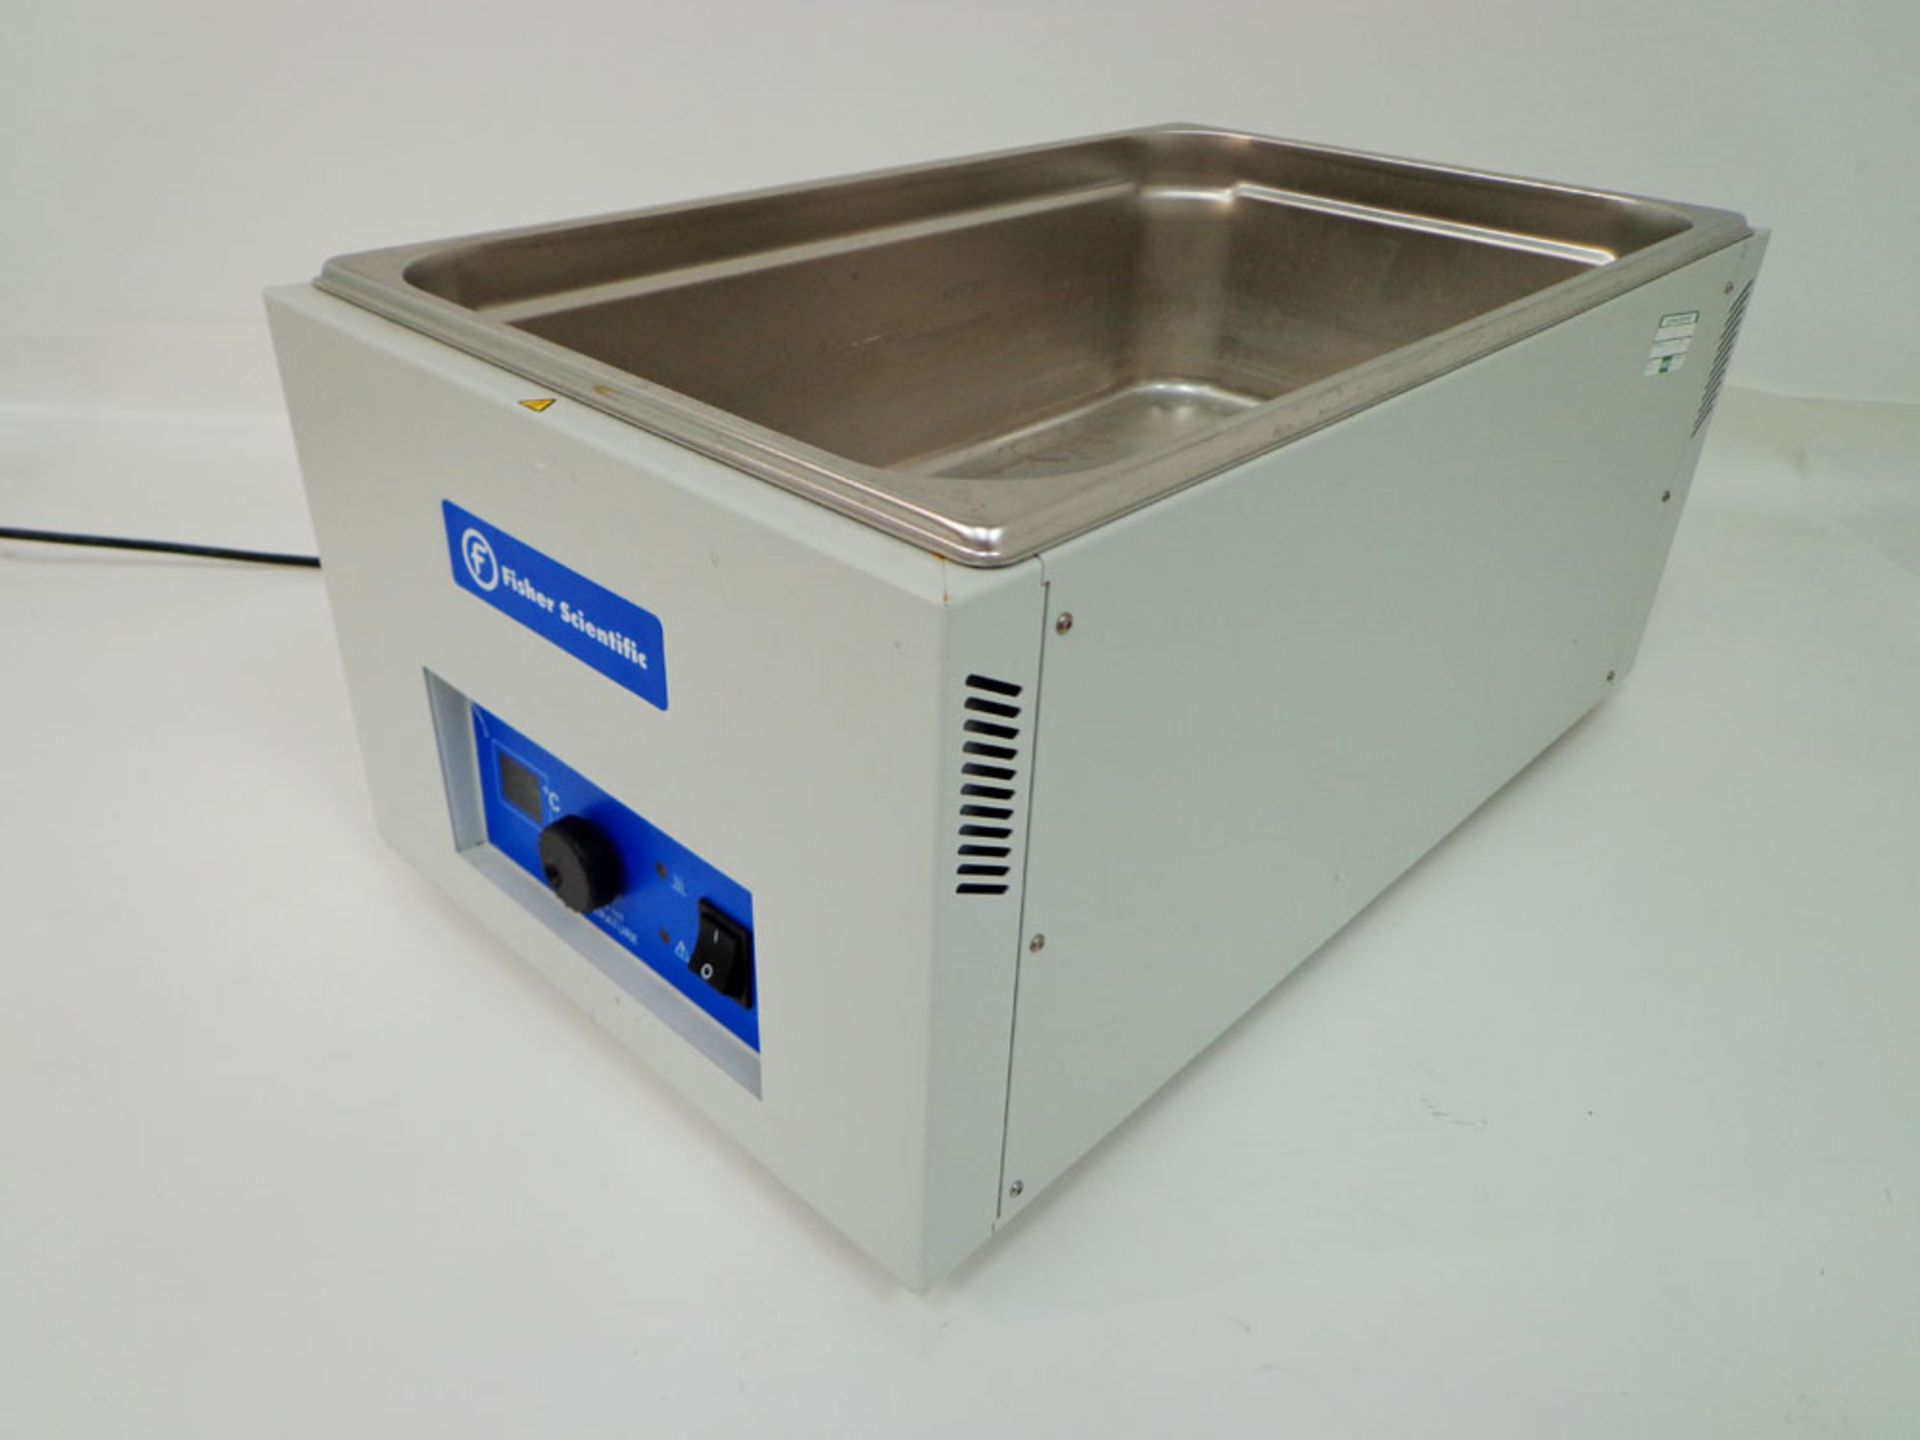 Fisher Scientific Water Bath DMU19, Without Lid, serial number 1Z0737006 (Ref: WA11843)